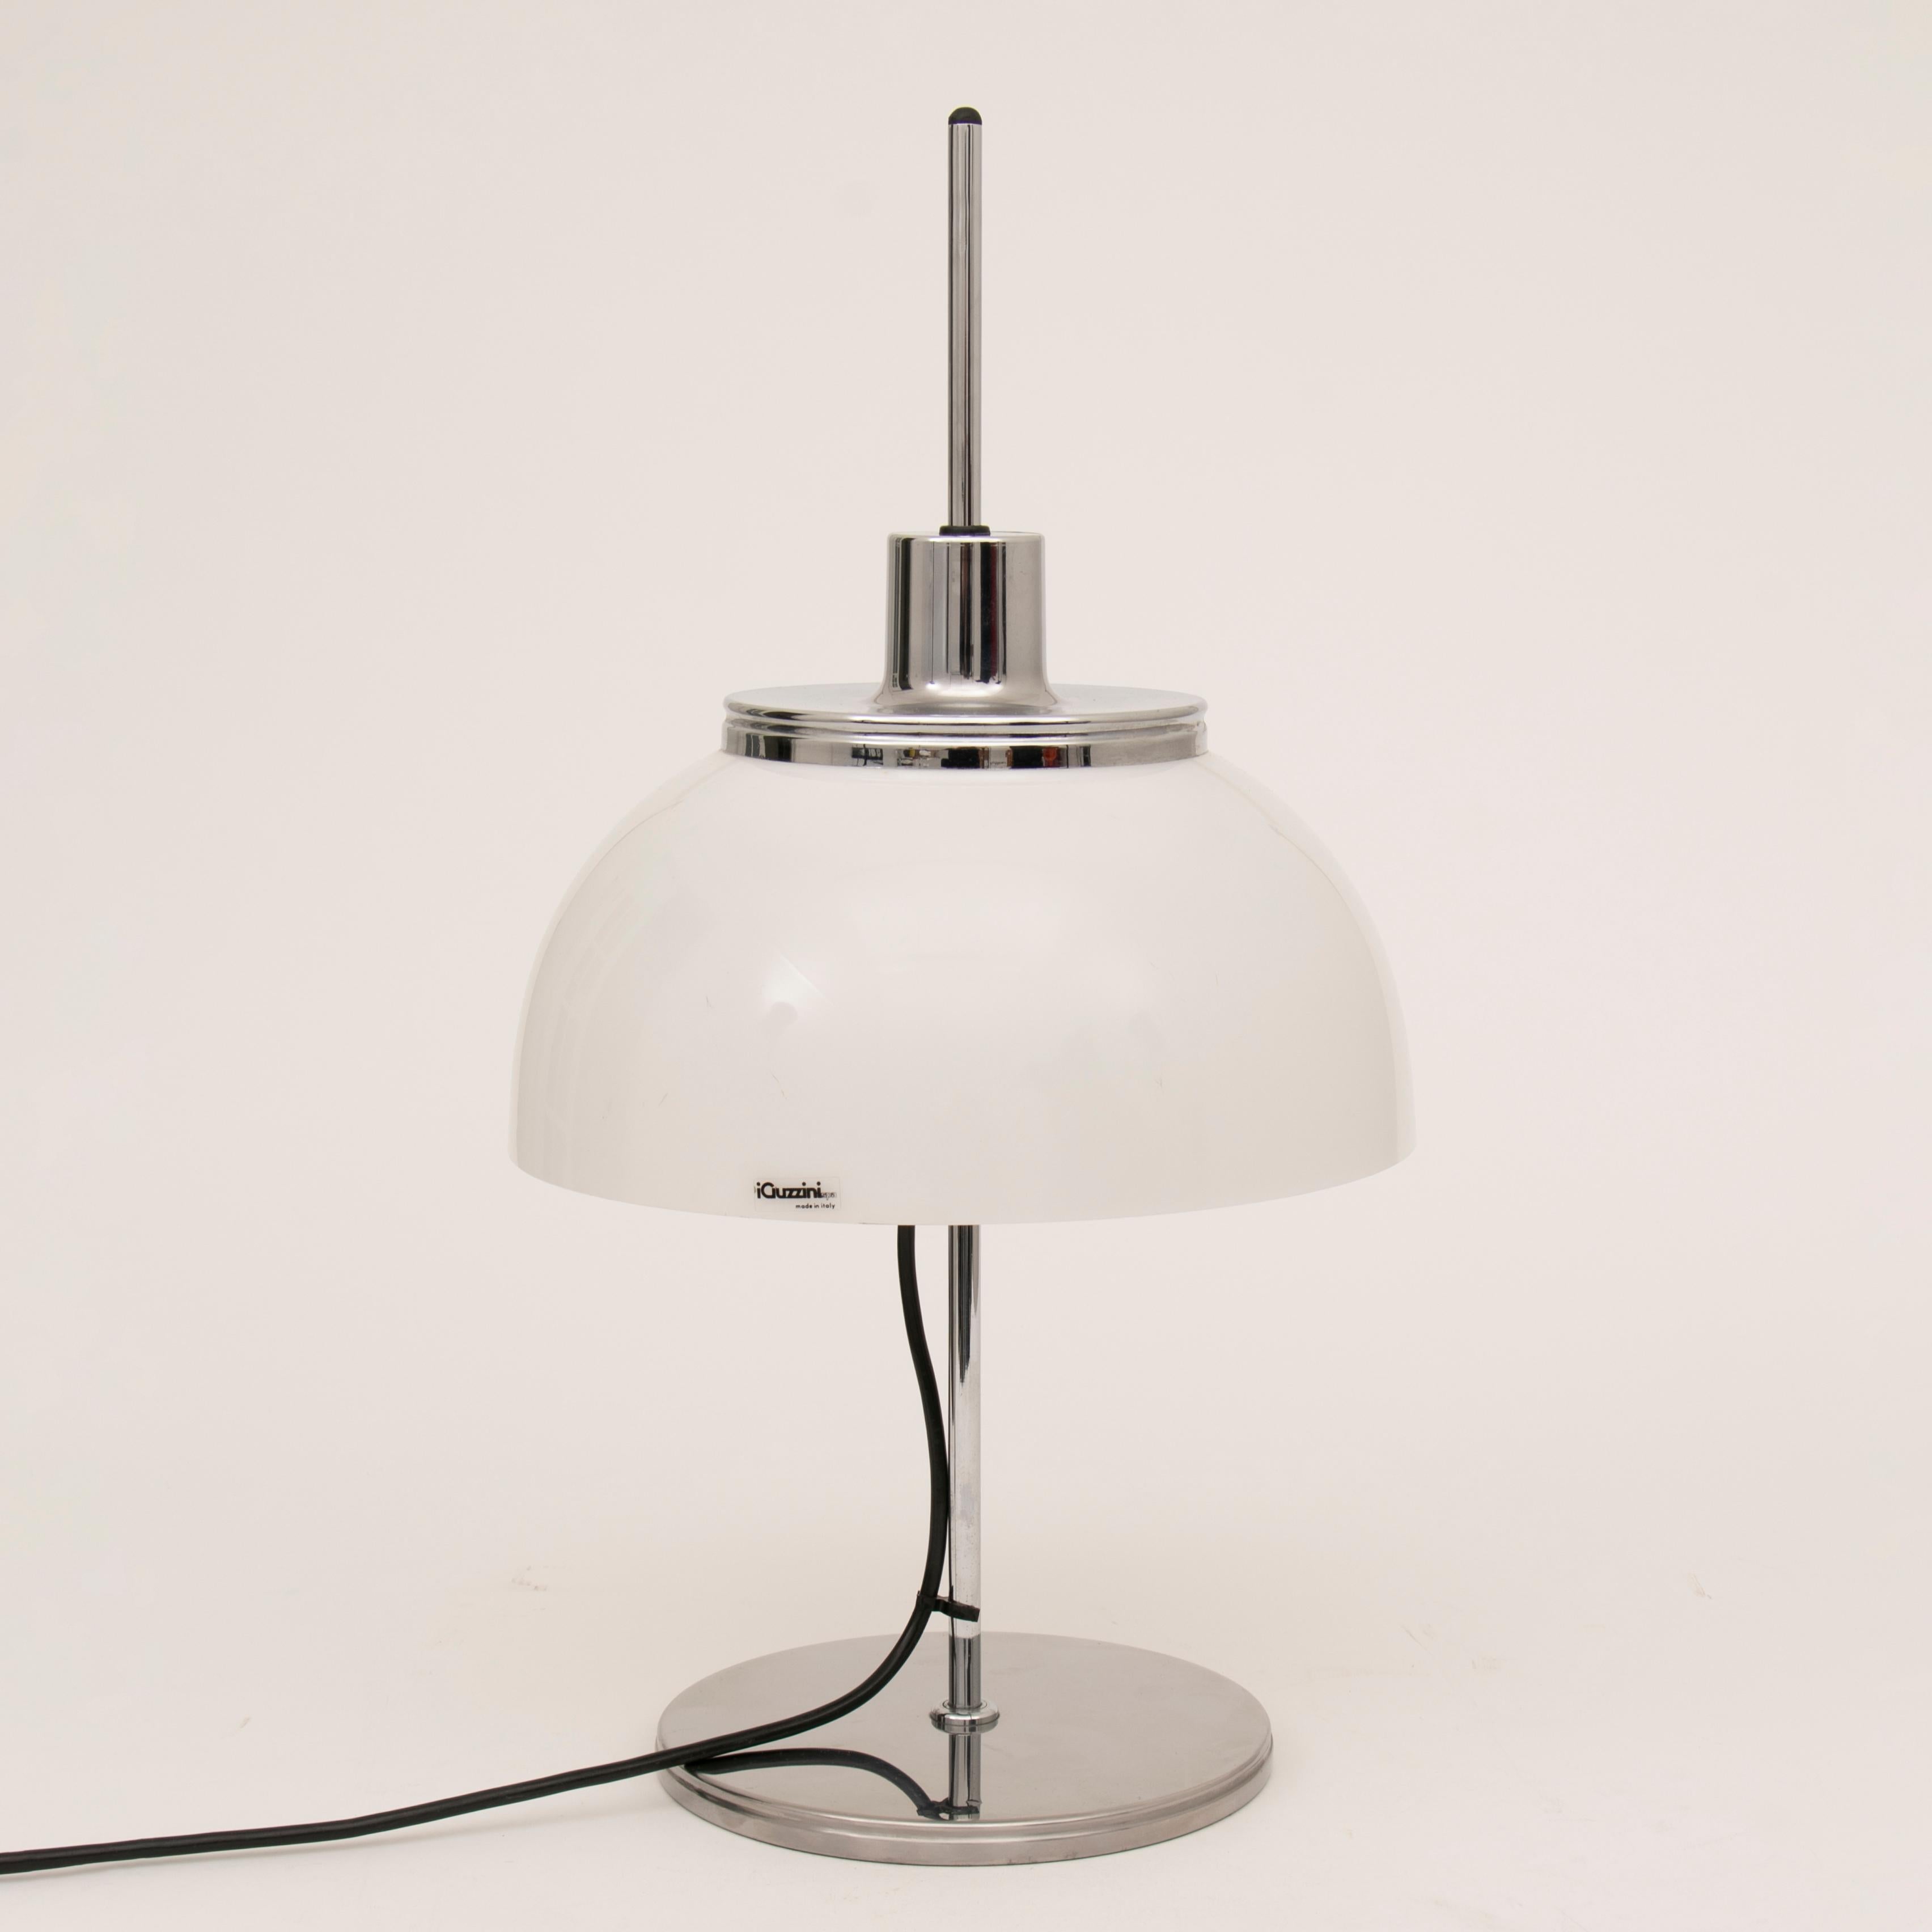 An Italian iGuzzini mushroom table lamp designed by Harvey Guzzini in the 1970s. The white, opaque, acrylic shade is adjustable in height, up and down, the central chrome column. The original Guzzini sticker is still present on the side of the